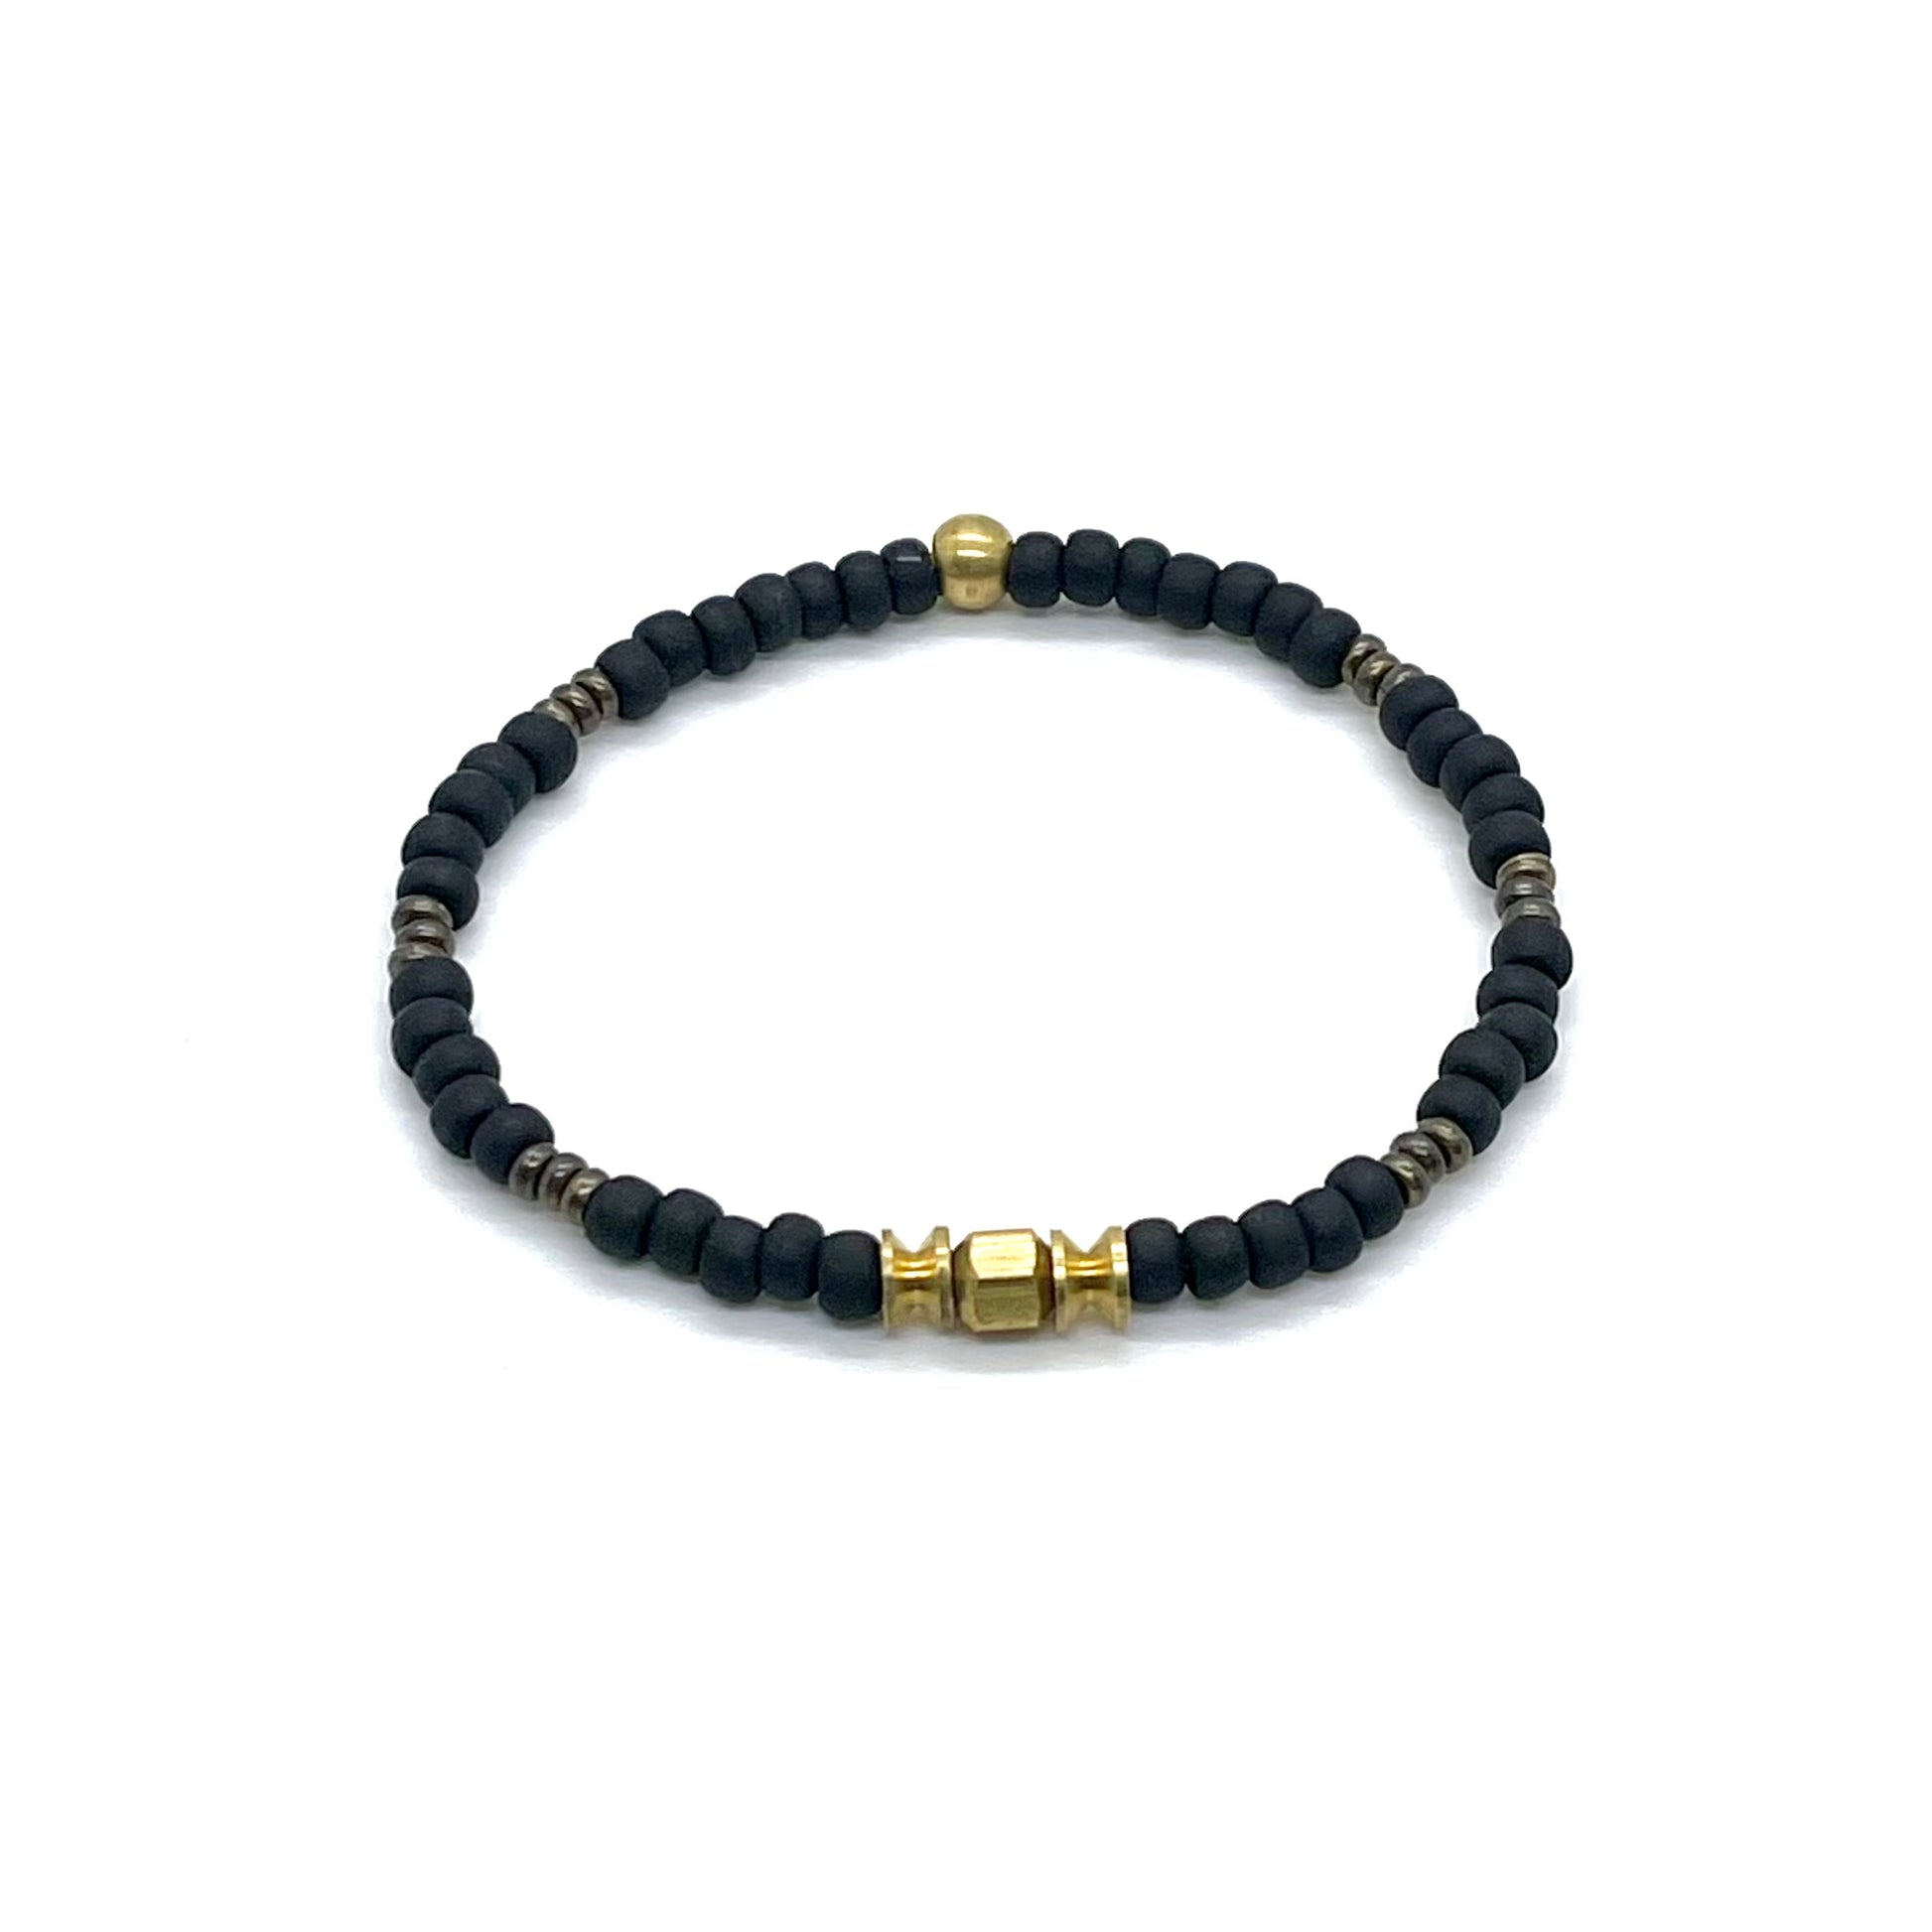 Brass bracelet with matte black seed beads, raw brass cylinders, and brass-plated disk beads on elastic stretch cord.